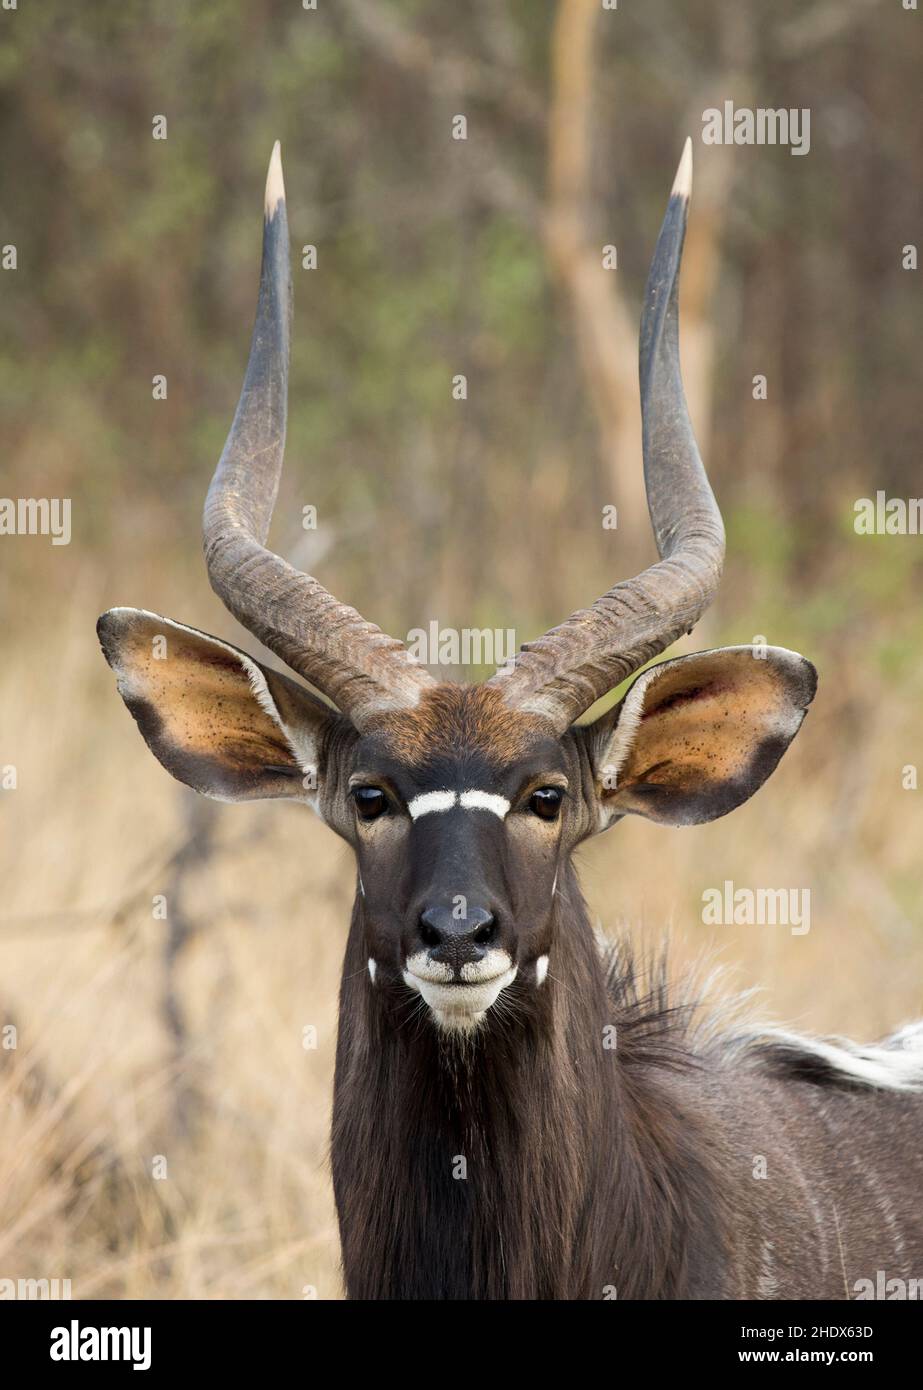 A close-up portrait of a Nyala (Tragelaphus angasii) antelope looking at the camera with his long horns, big ears and beautiful dark brown coat. Stock Photo